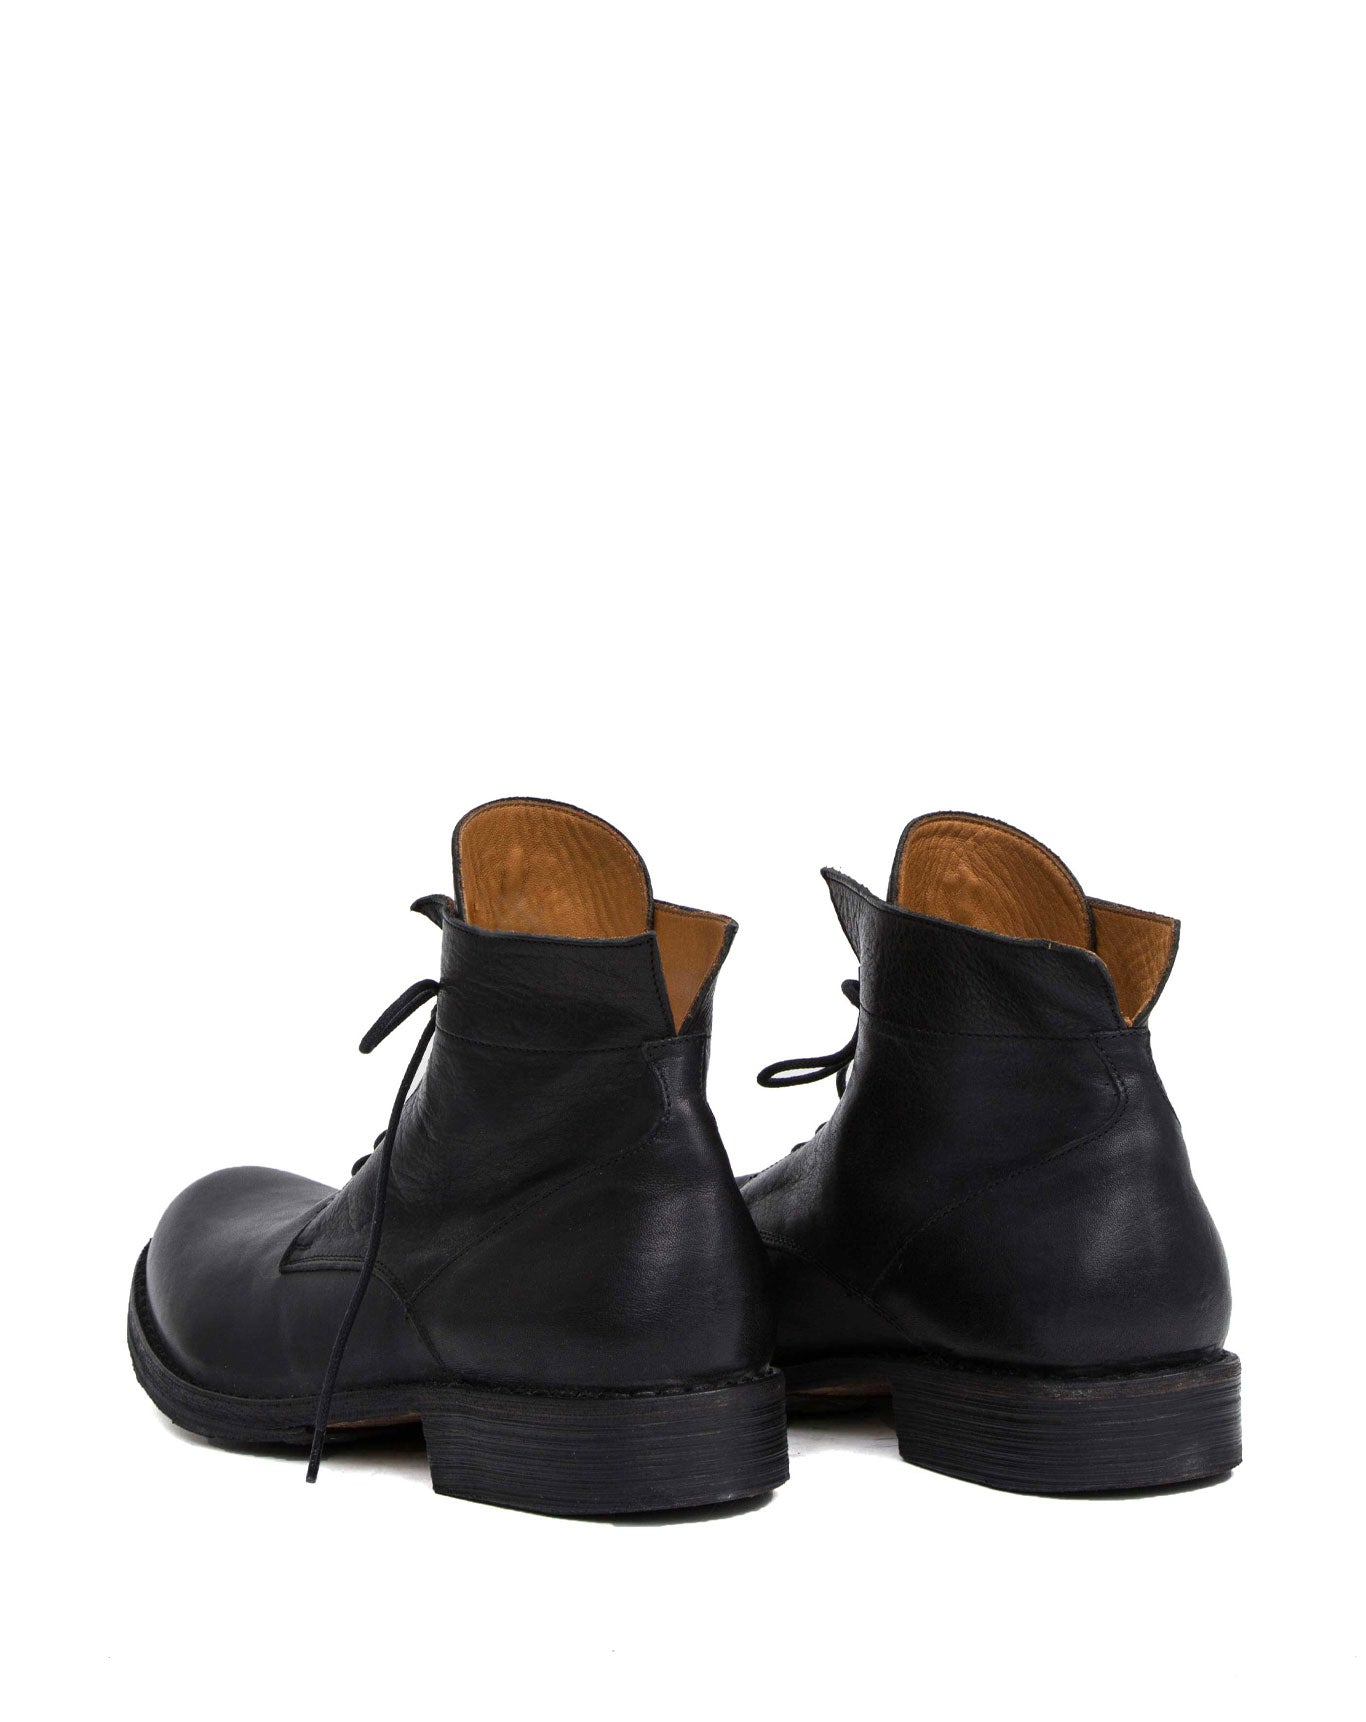 Fiorentini + Baker, ETERNITY 745, Iconic heritage style inspired by a 1920’s work boot. Unisex lace up ankle boot. Handcrafted by skilled artisans. Made in Italy. Made to last.